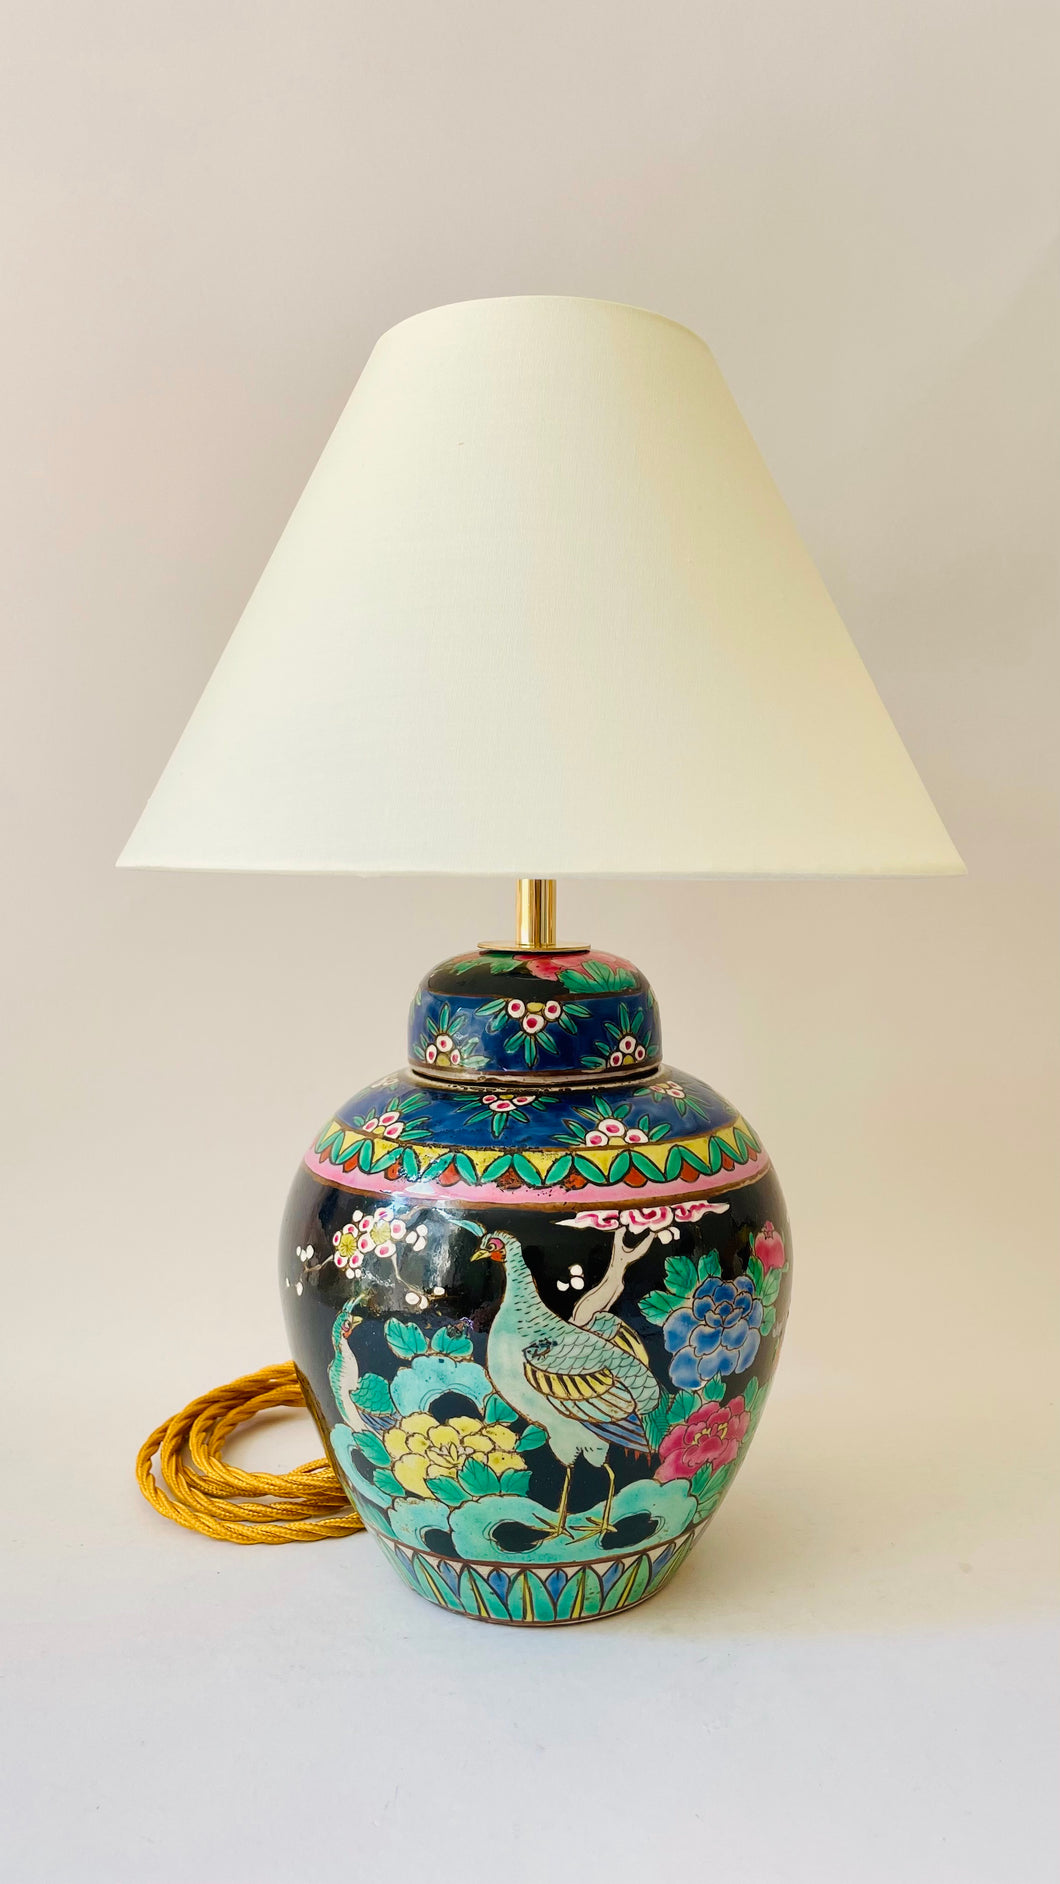 Antique Japanese Peacock Lamp - pre order for early July